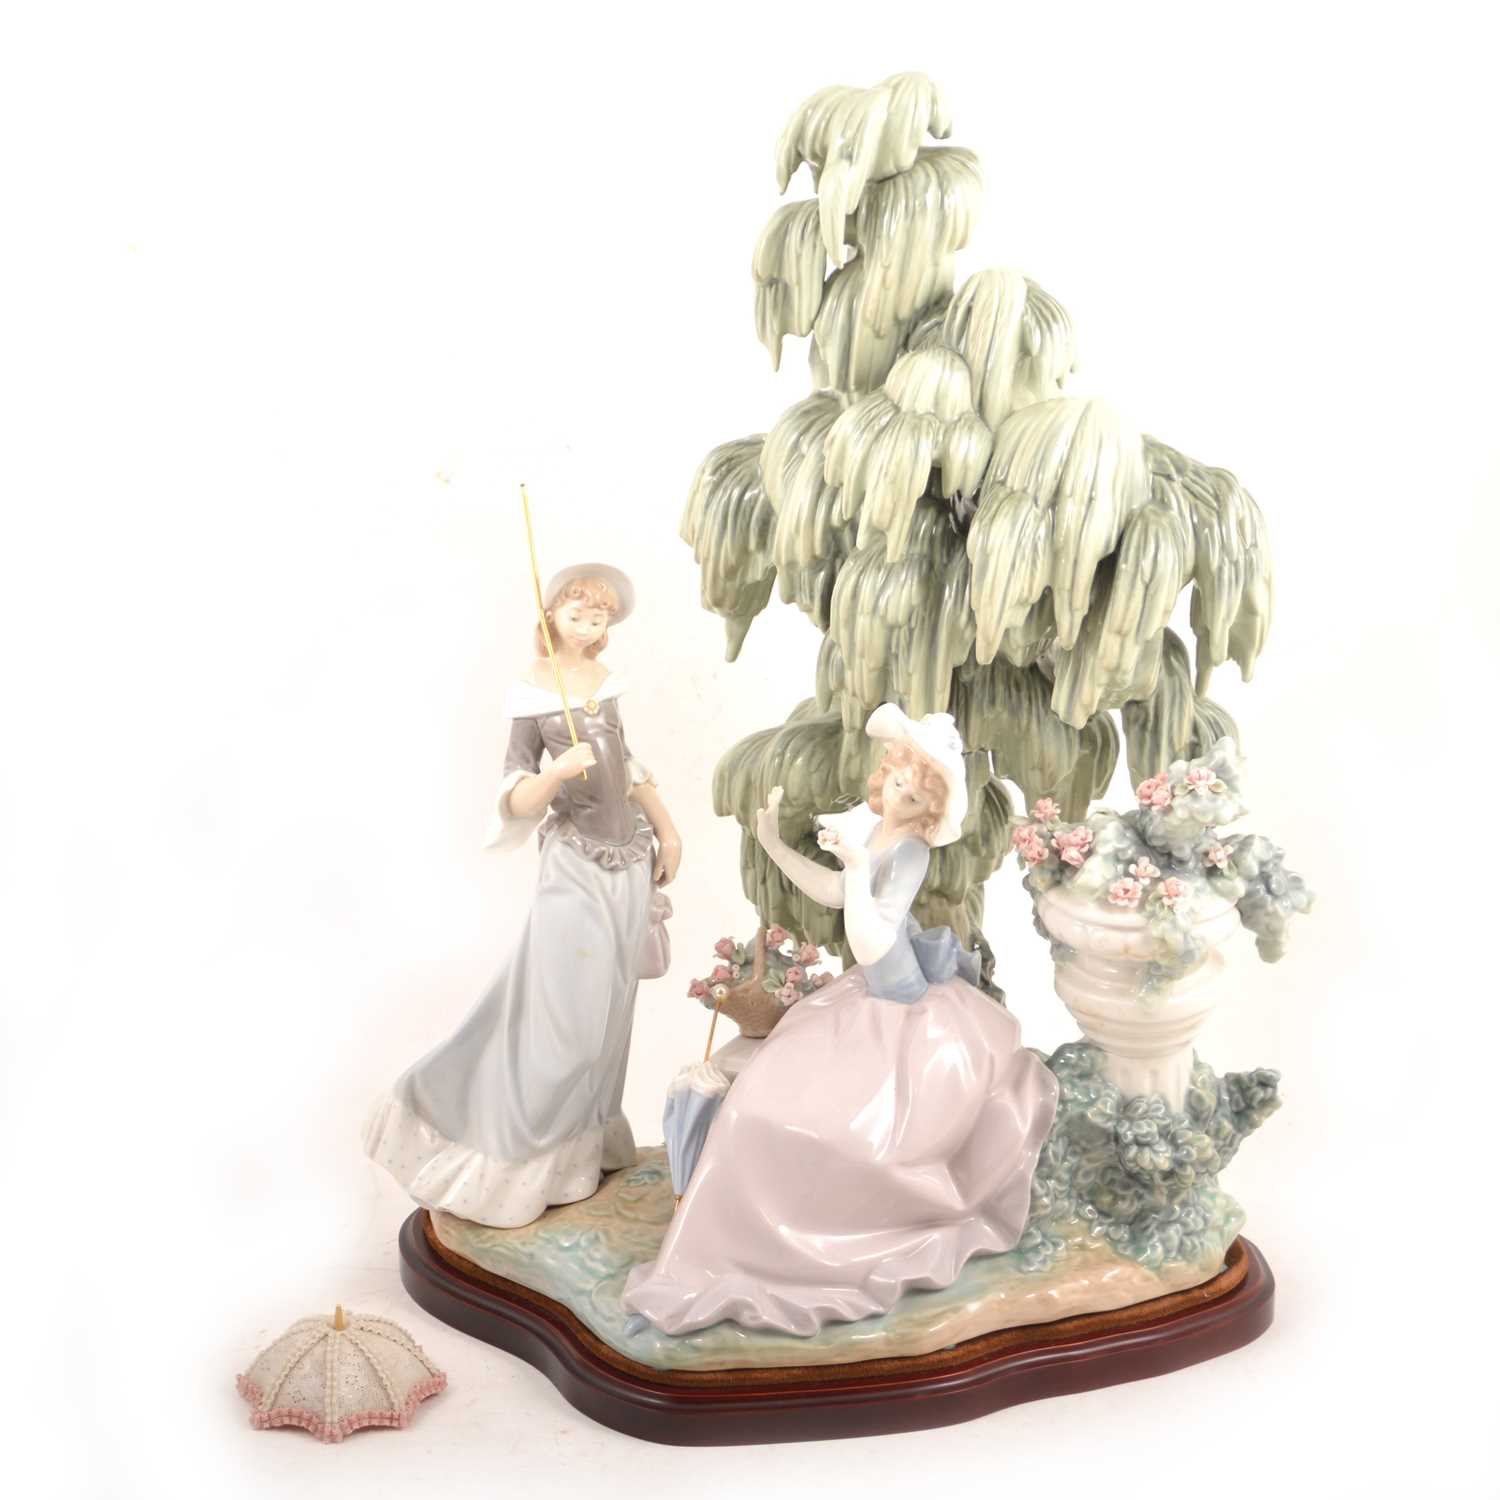 Lot 14 - Lladro - "Under The Willow" group